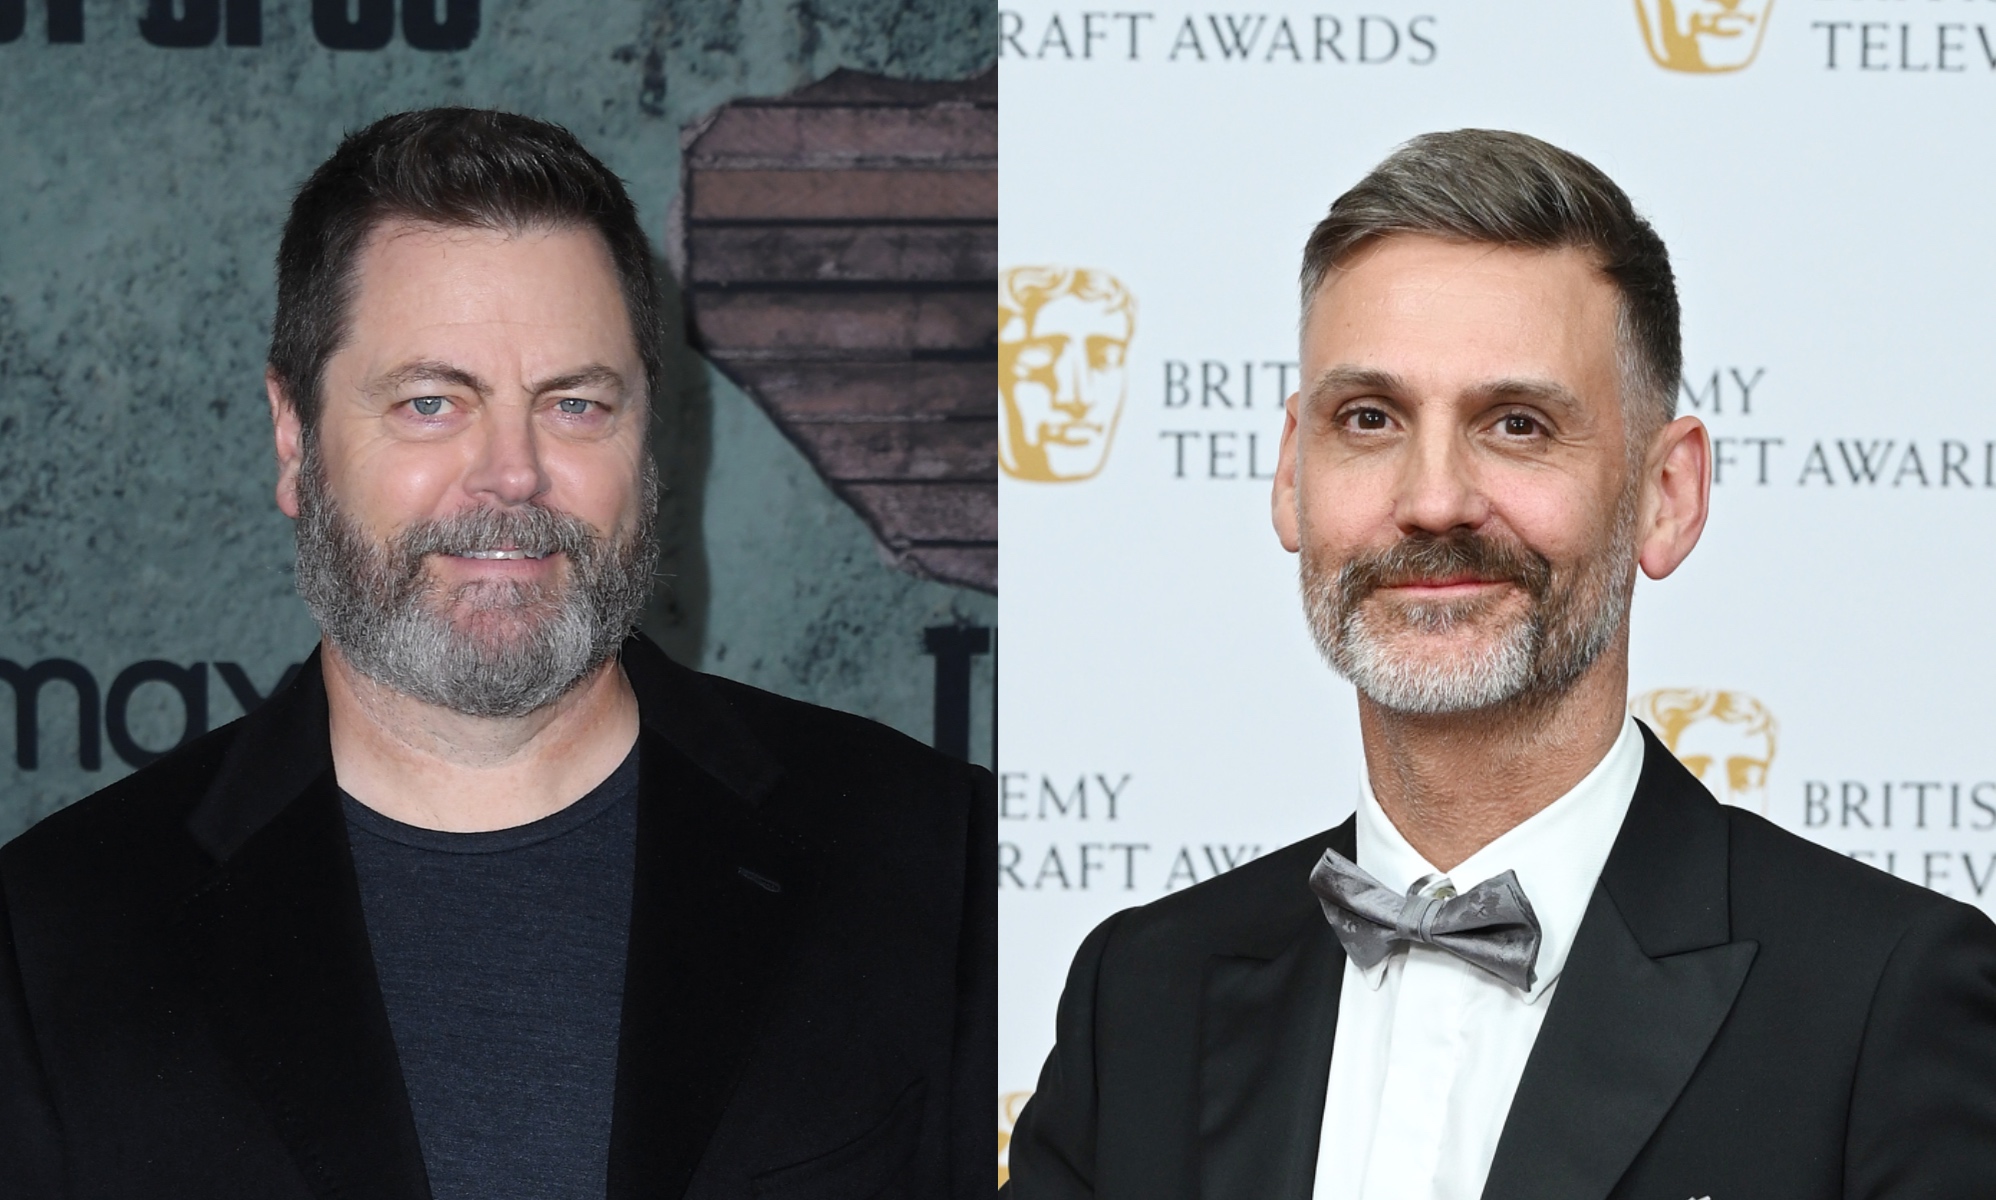 Last of Us' HBO Series Casts Nick Offerman as Bill